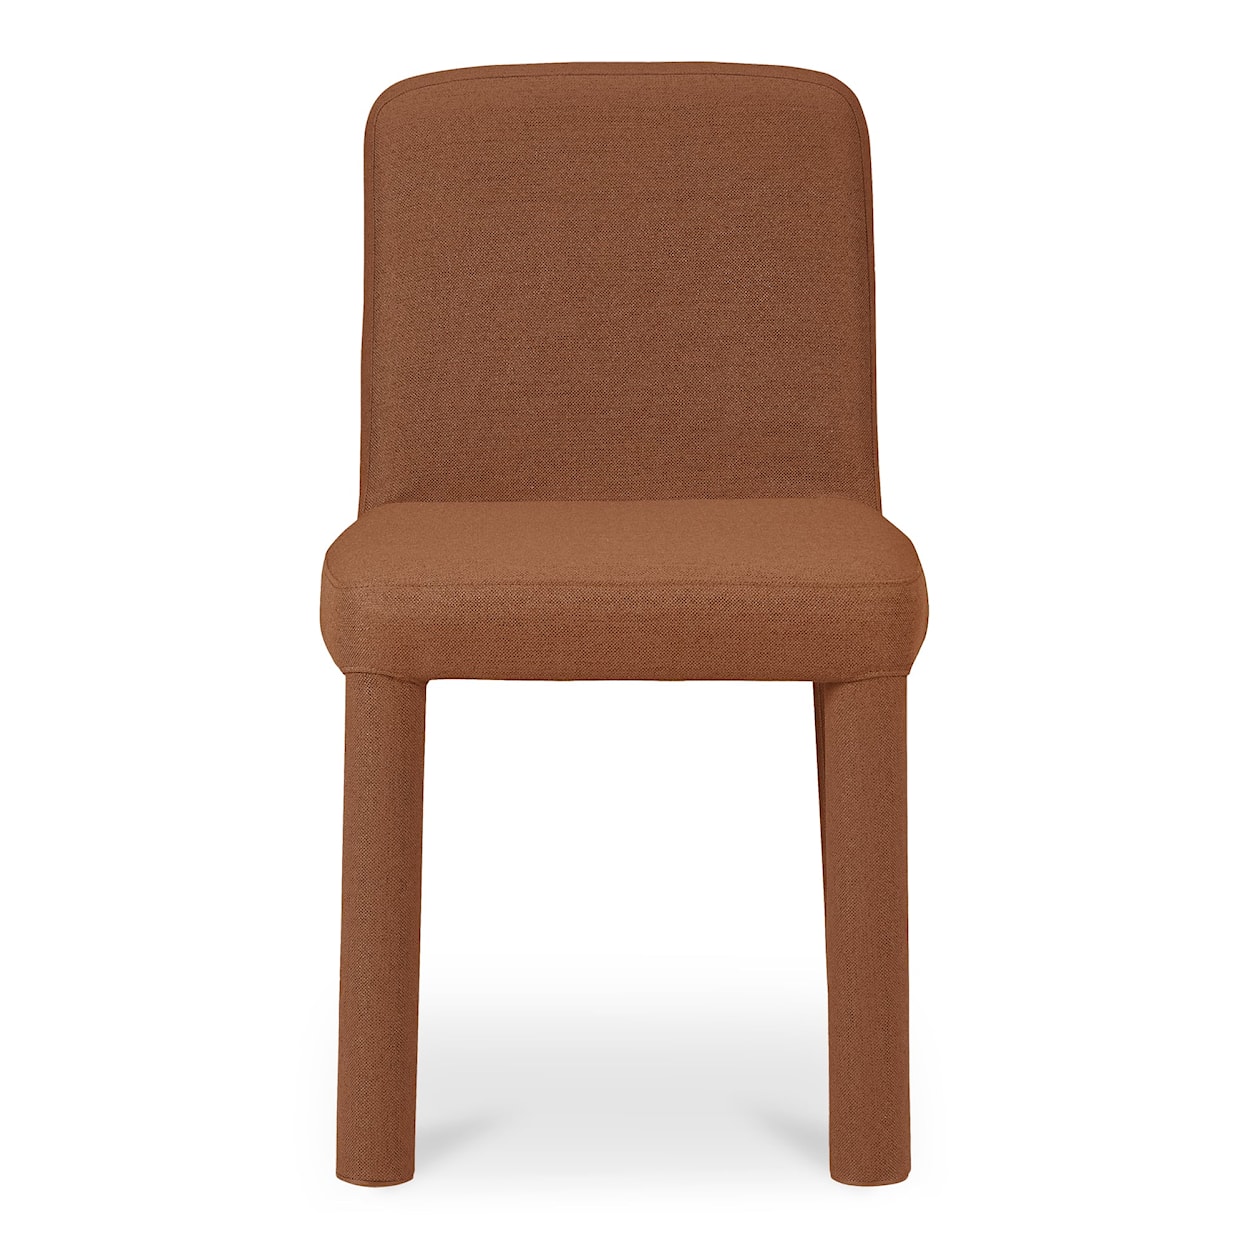 Moe's Home Collection Place Upholstered Dining Chair Set